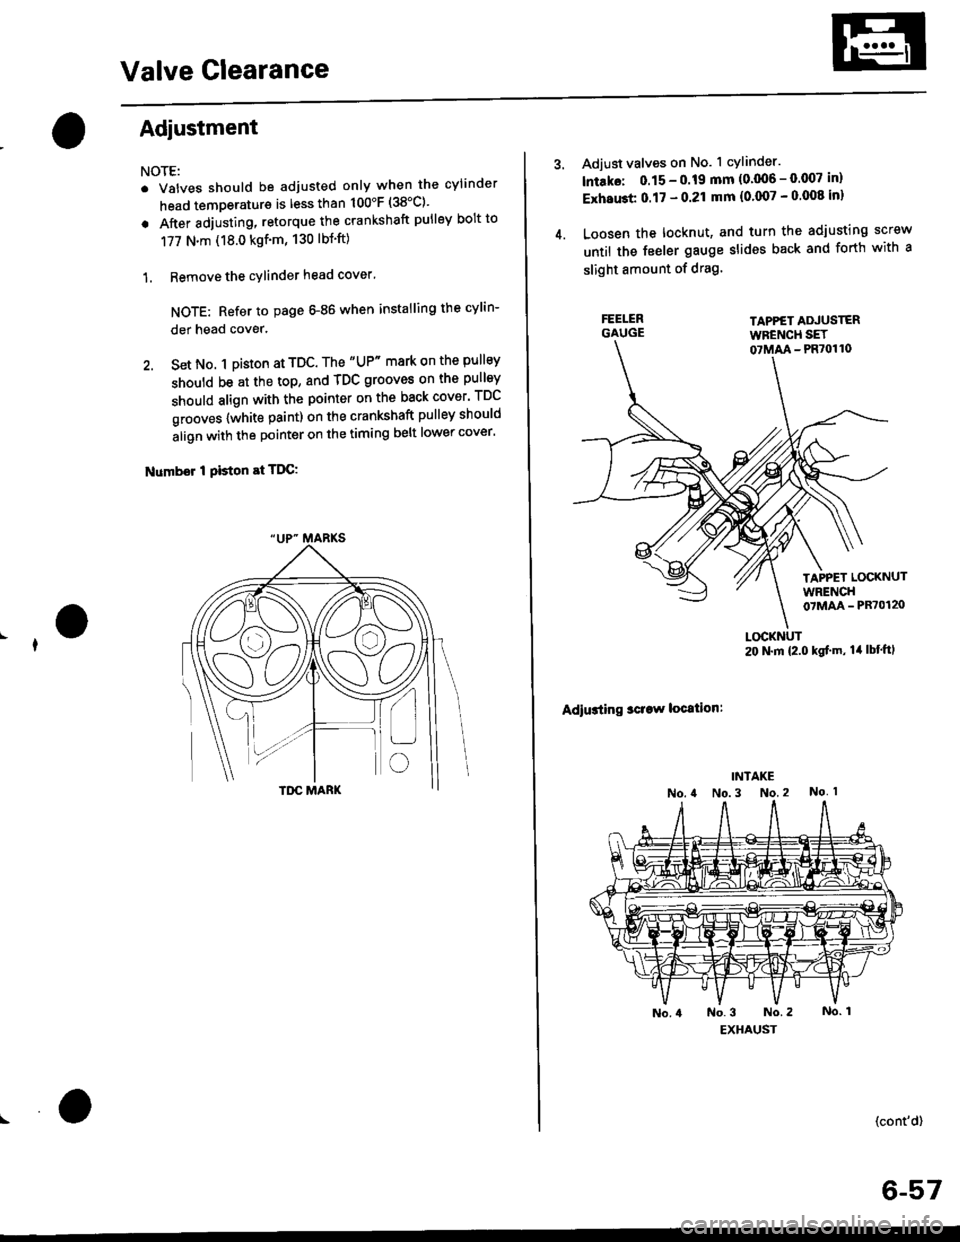 HONDA CIVIC 1996 6.G User Guide Valve Glearance
Adjustment
NOTE:
. Valves should be adjusted only when the cylinder
head temperaturs is less than 100F (38C)
. After adjusting, retorque the crankshaft pulley bolt to
177 N.m (18.0 